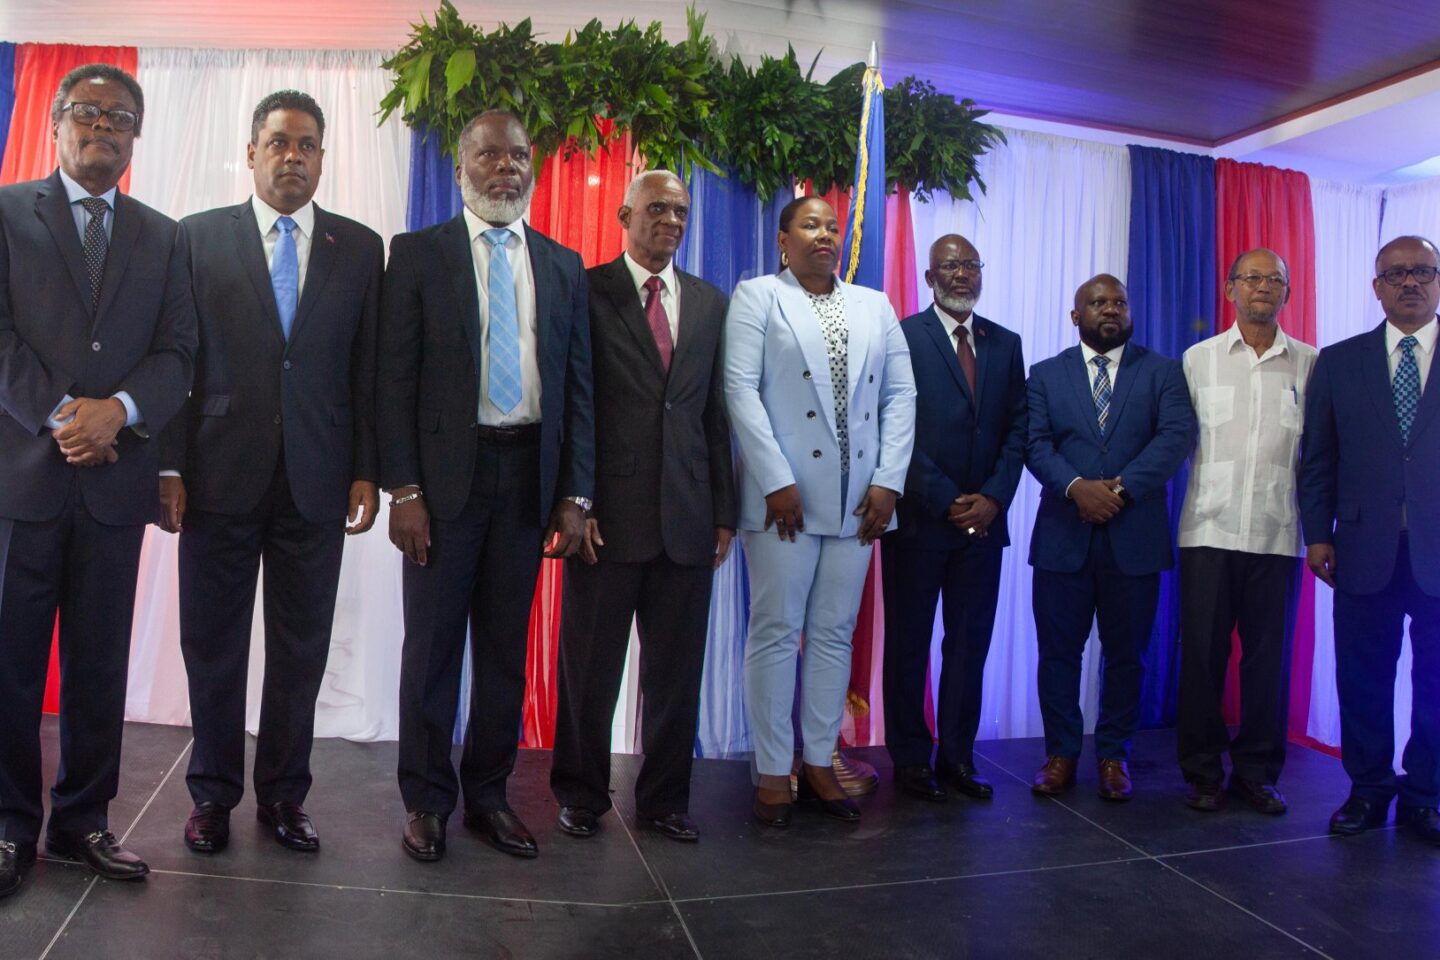 haiti-grard-gilles,-tt-kale-3-sdp,-will-assume-the-rotating-presidency-of-the-cpt-during-possible-general-elections-in-2025